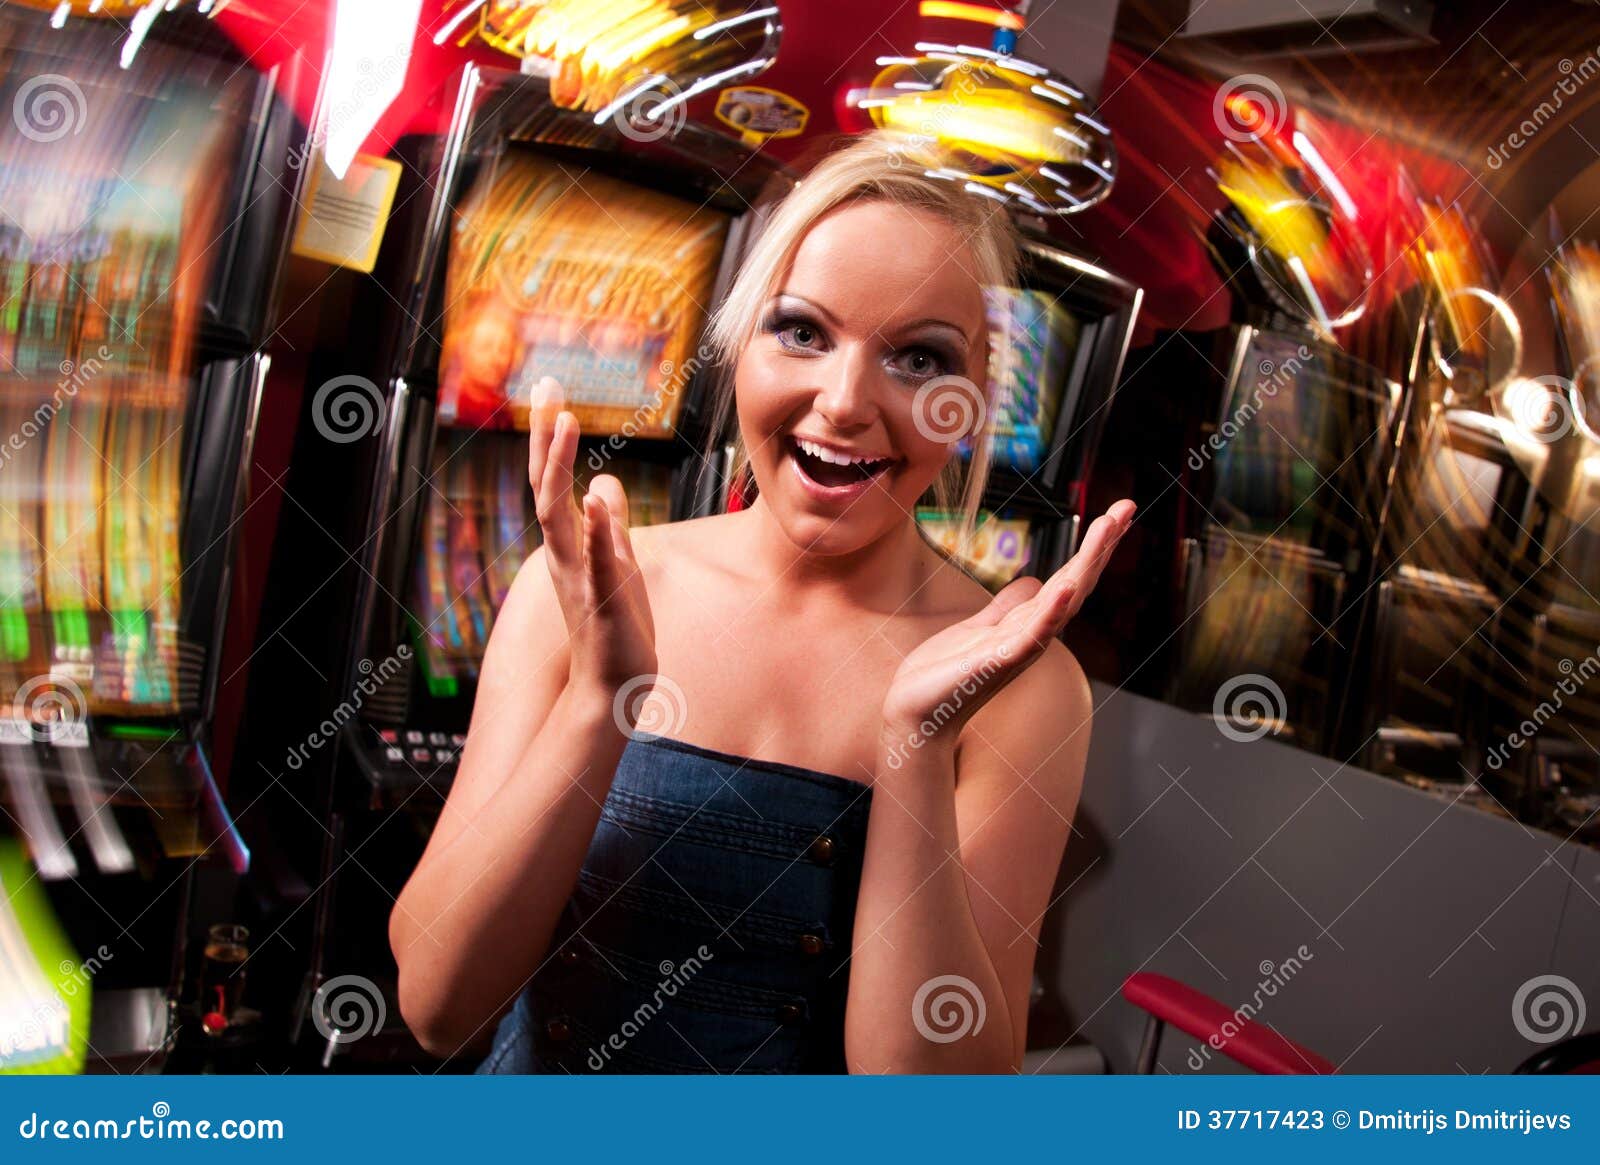 Young Woman In Casino On A Slot Machine Stock Photo 